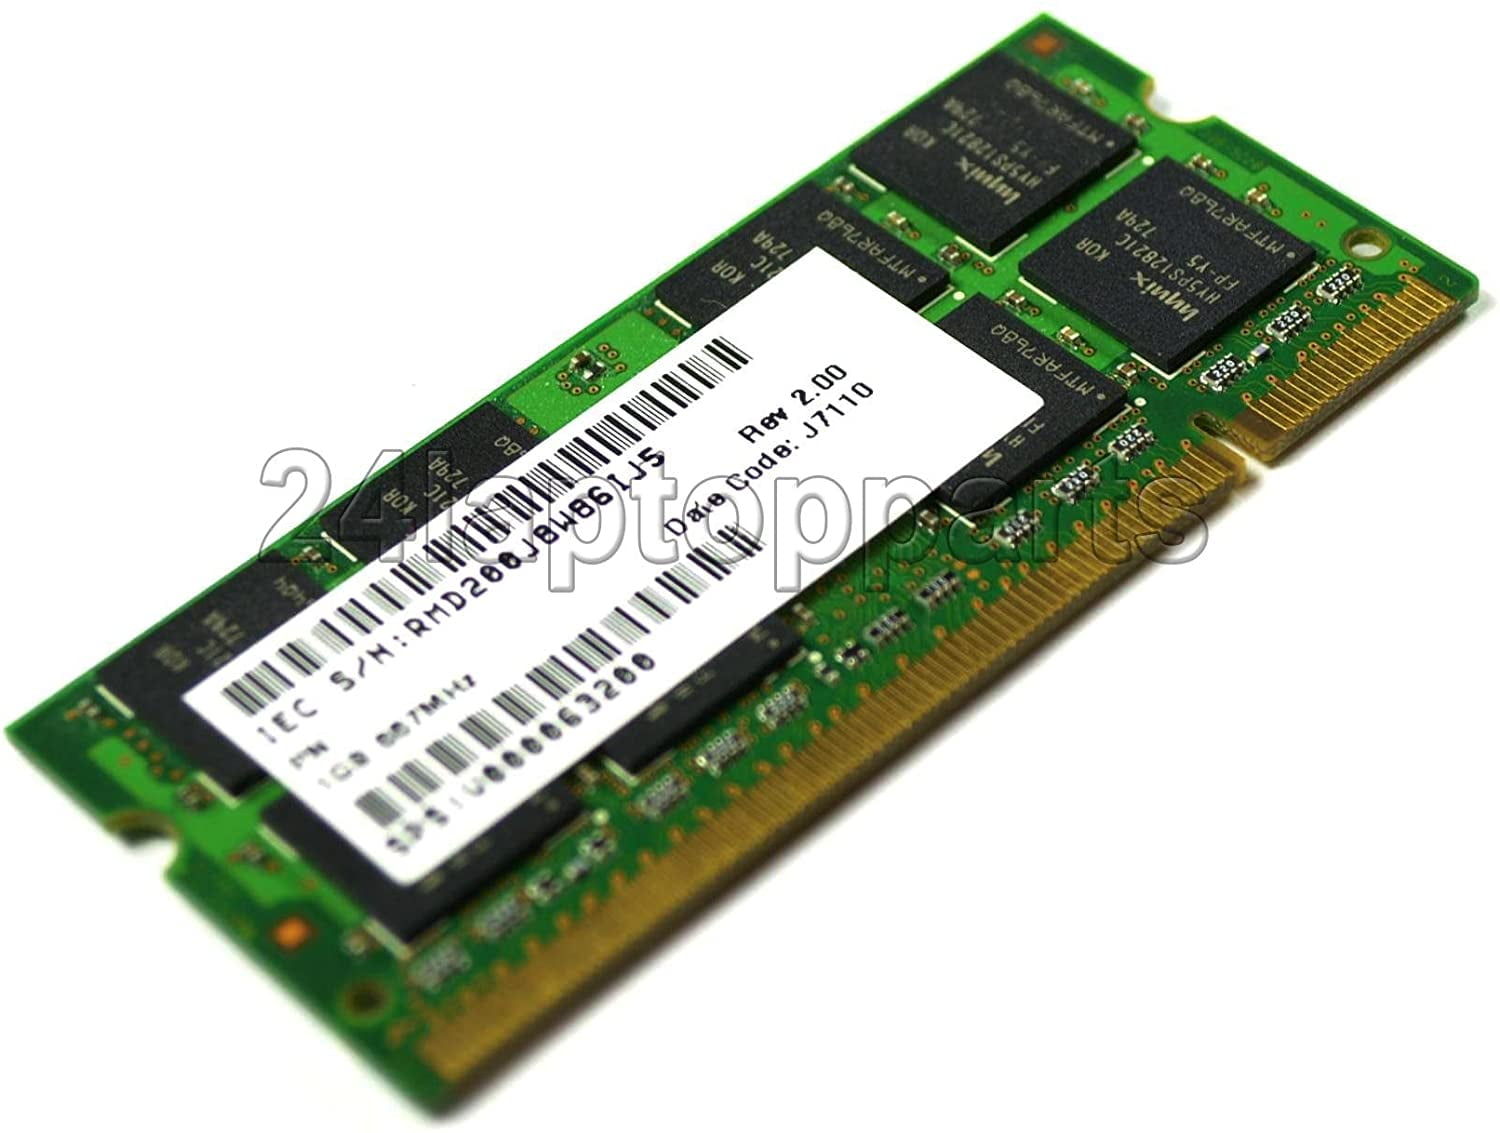 ECC DIMM Memory RAM For Laptop Notebook Use ！ 1GB DDR2 667 PC2 5300 200 Pin Non 